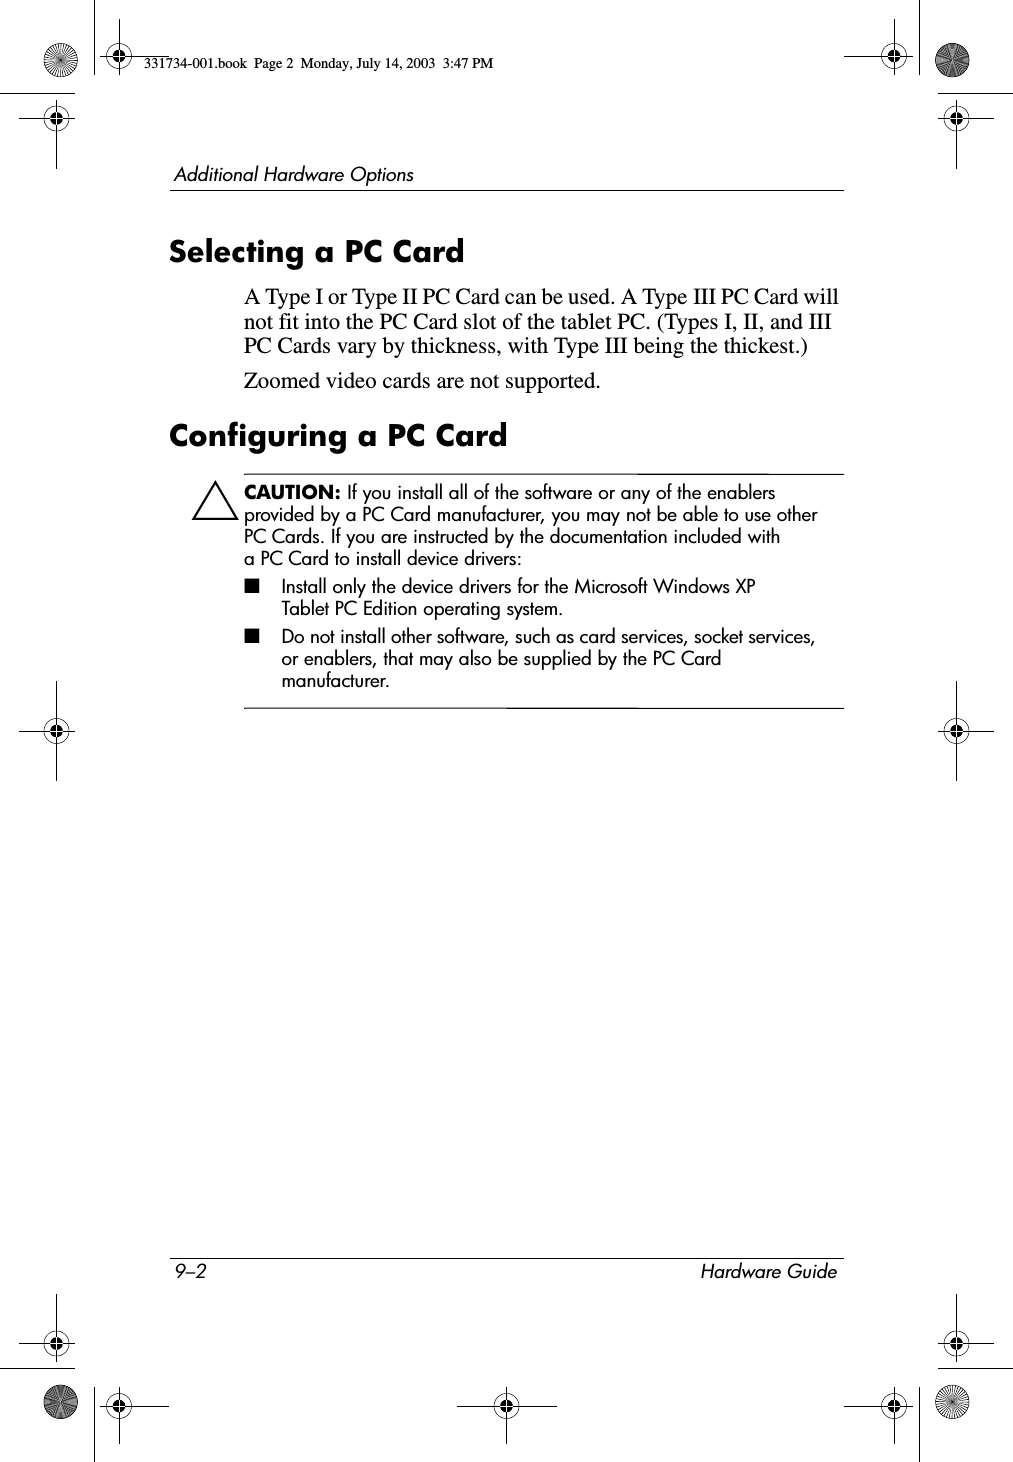 9–2 Hardware GuideAdditional Hardware OptionsSelecting a PC CardA Type I or Type II PC Card can be used. A Type III PC Card will not fit into the PC Card slot of the tablet PC. (Types I, II, and III PC Cards vary by thickness, with Type III being the thickest.)Zoomed video cards are not supported.Configuring a PC CardÄCAUTION: If you install all of the software or any of the enablers provided by a PC Card manufacturer, you may not be able to use other PC Cards. If you are instructed by the documentation included with a PC Card to install device drivers:■Install only the device drivers for the Microsoft Windows XP Tablet PC Edition operating system.■Do not install other software, such as card services, socket services, or enablers, that may also be supplied by the PC Card manufacturer.331734-001.book  Page 2  Monday, July 14, 2003  3:47 PM